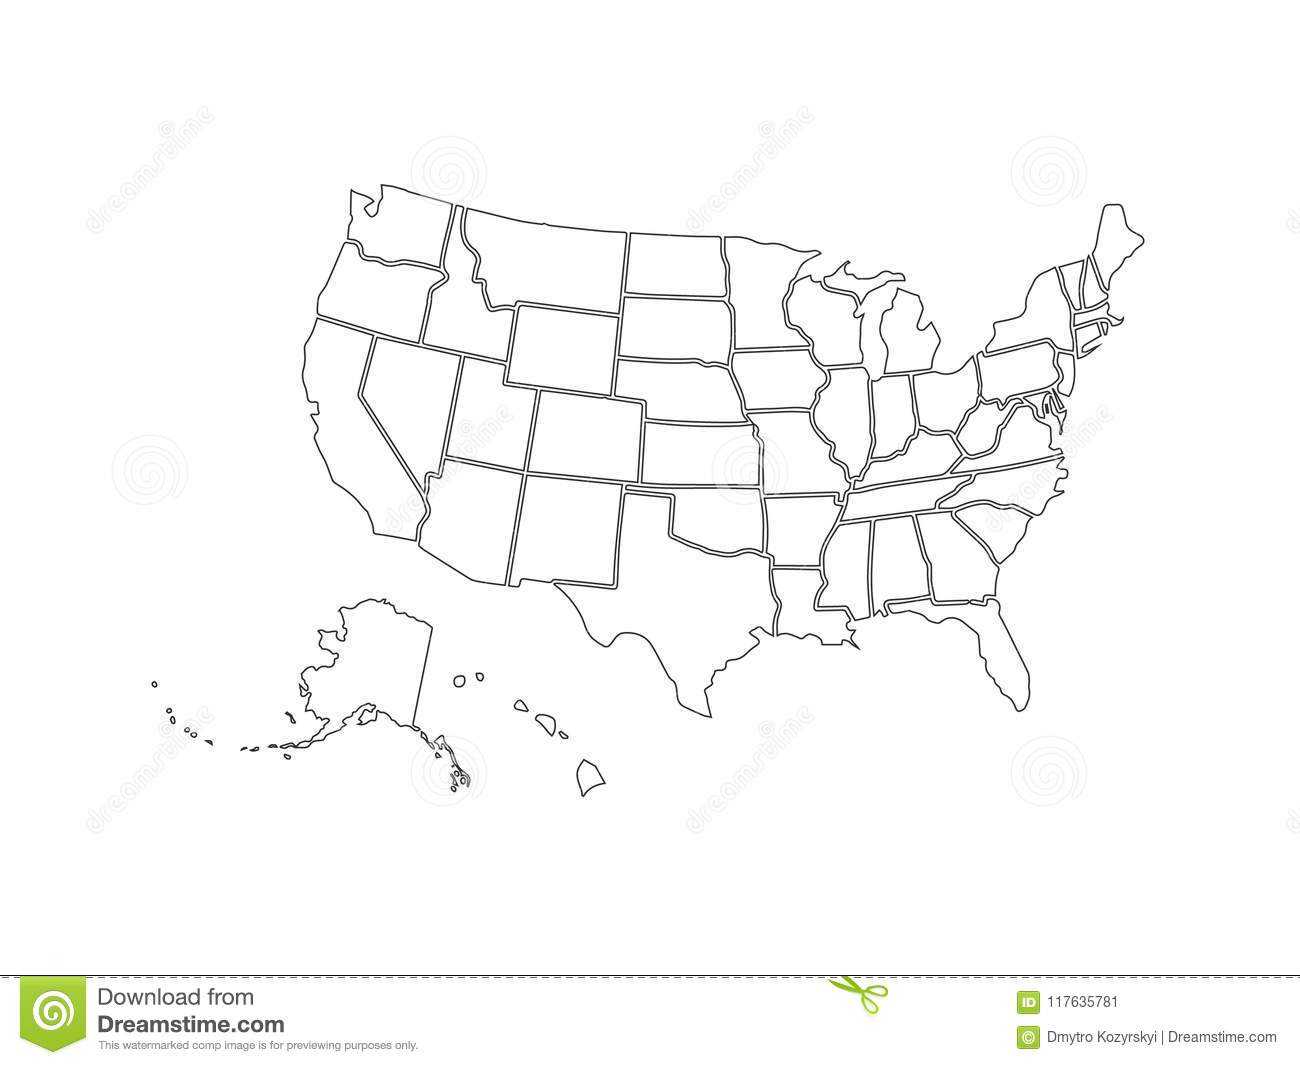 38E8A Blank Us Map Template | Wiring Library With Regard To United States Map Template Blank